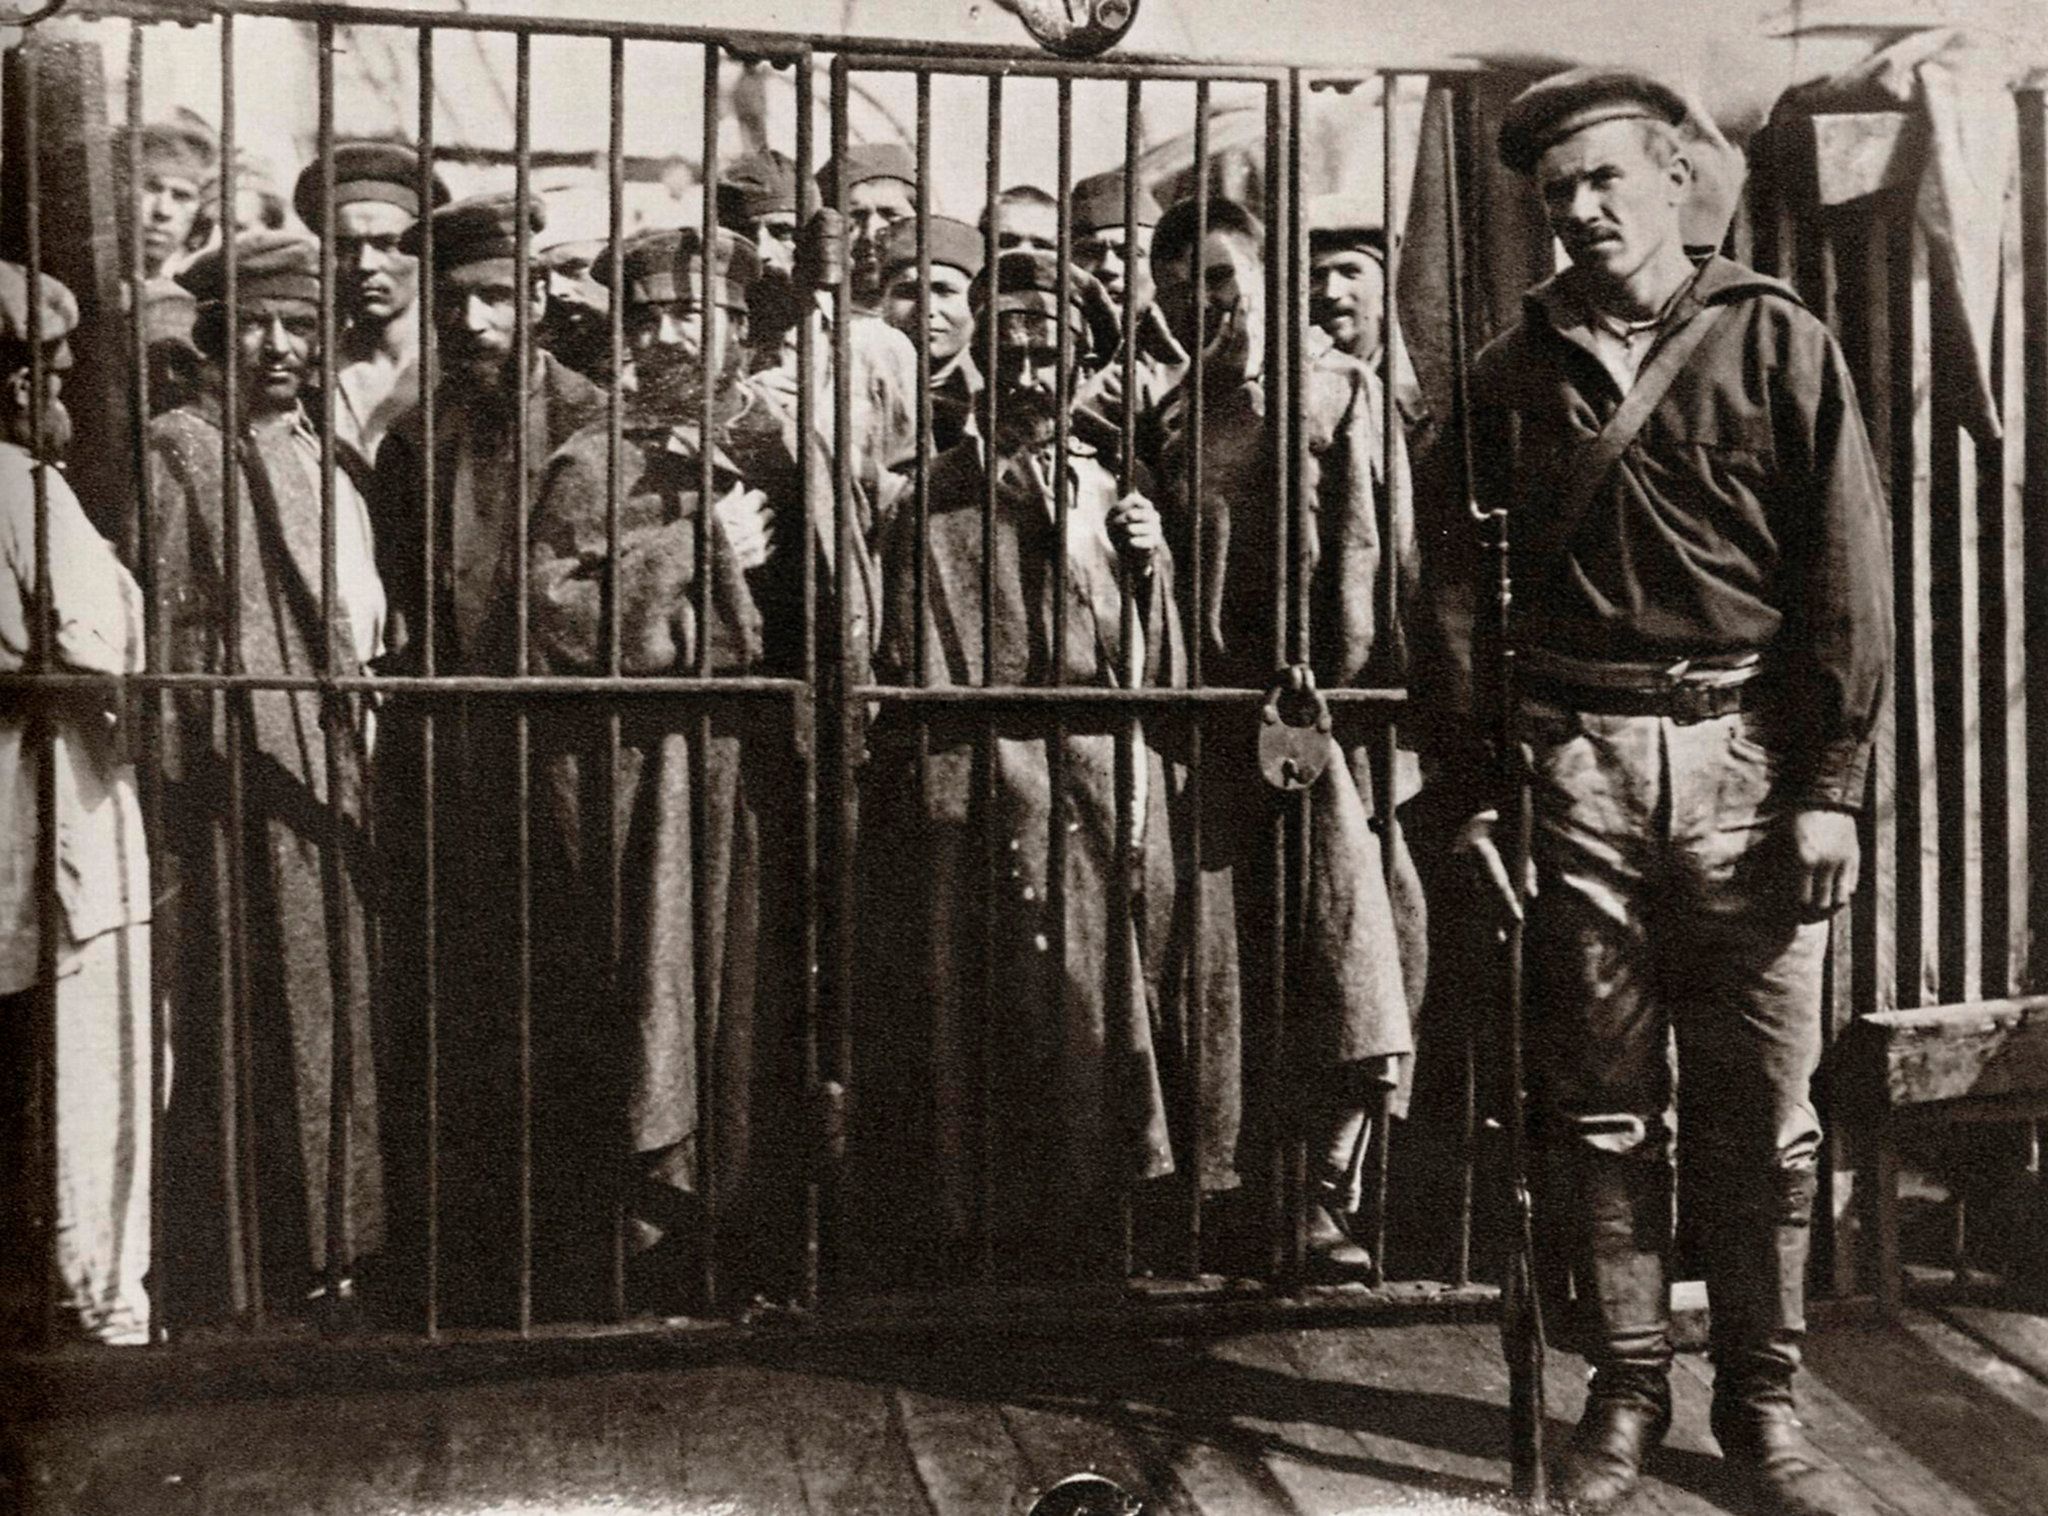 The Grim Reality: Life in Siberian Prisons during the 19th Century